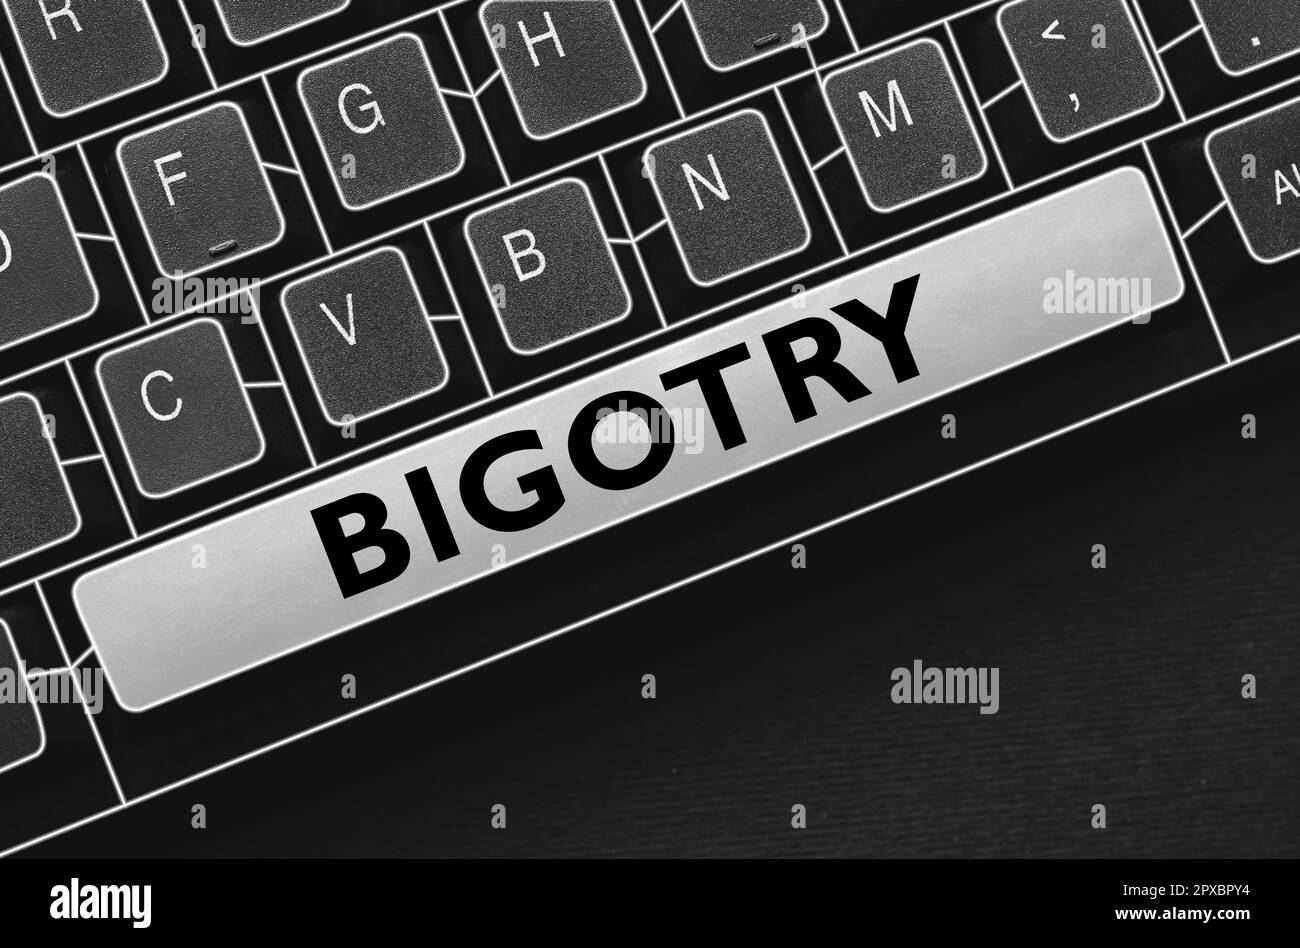 Sign displaying Bigotry, Conceptual photo obstinate or intolerant devotion to one's own opinions and prejudices Stock Photo